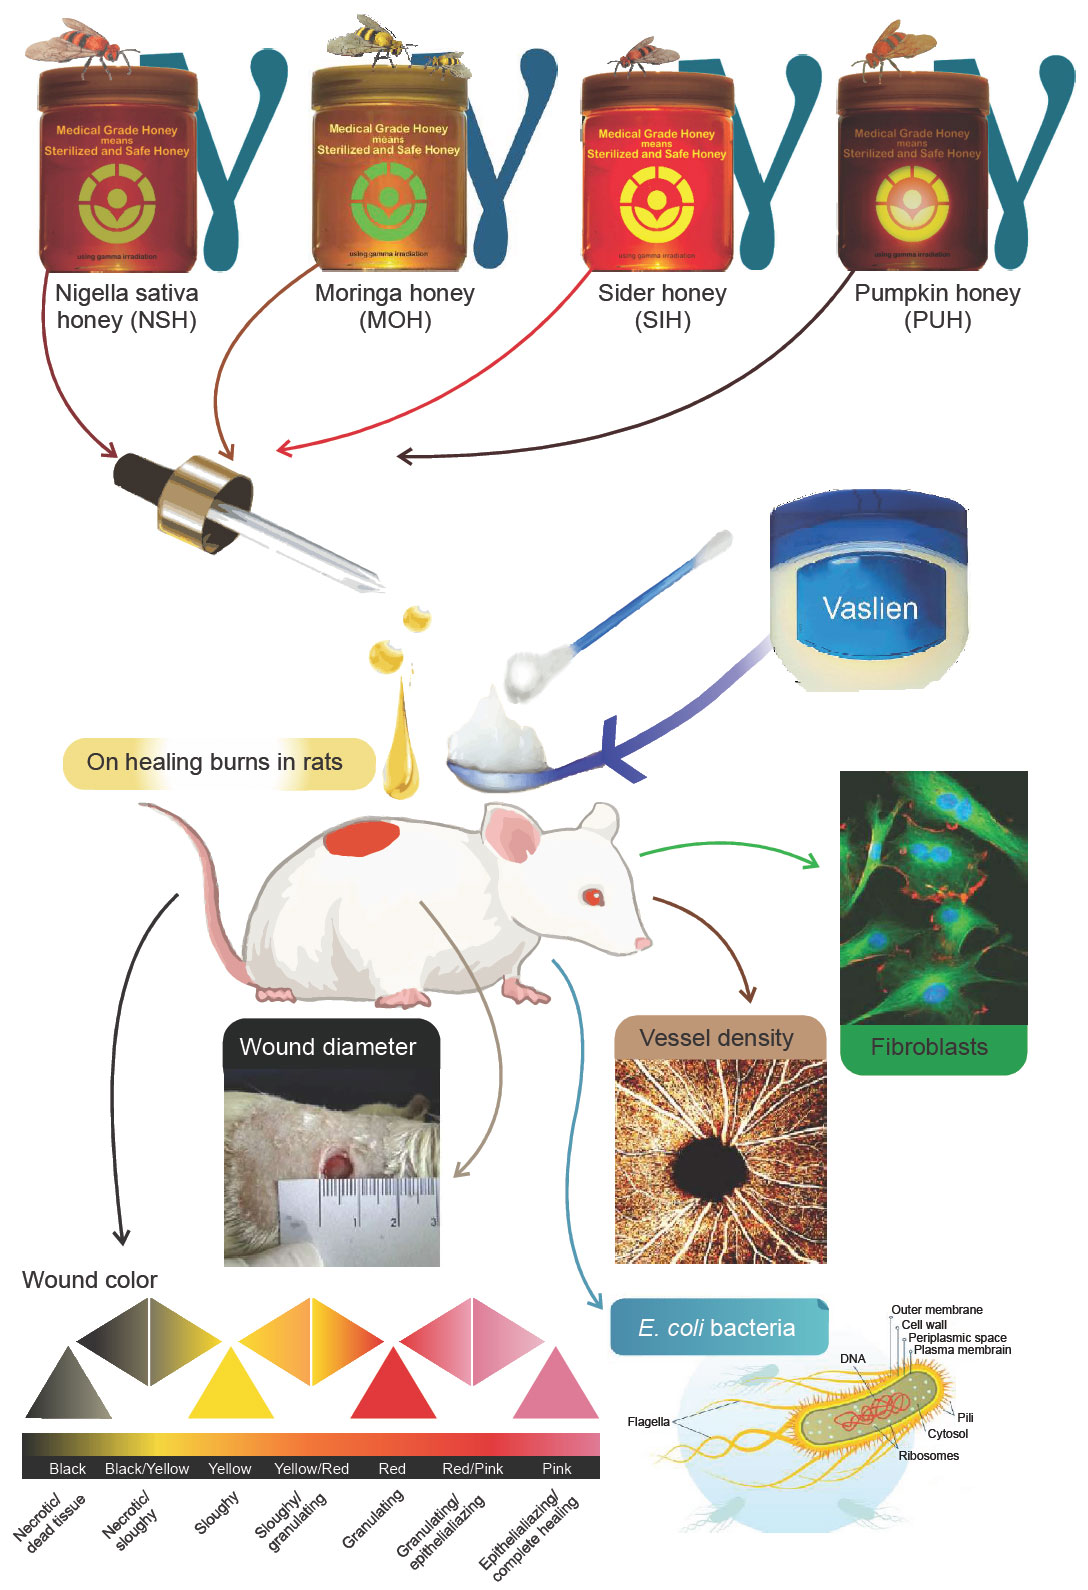 Image for - Investigation of Some Histological, Physiological and Microbiological Properties of Honey Types and Vaseline as Medications of Second Degree Burns in Rats